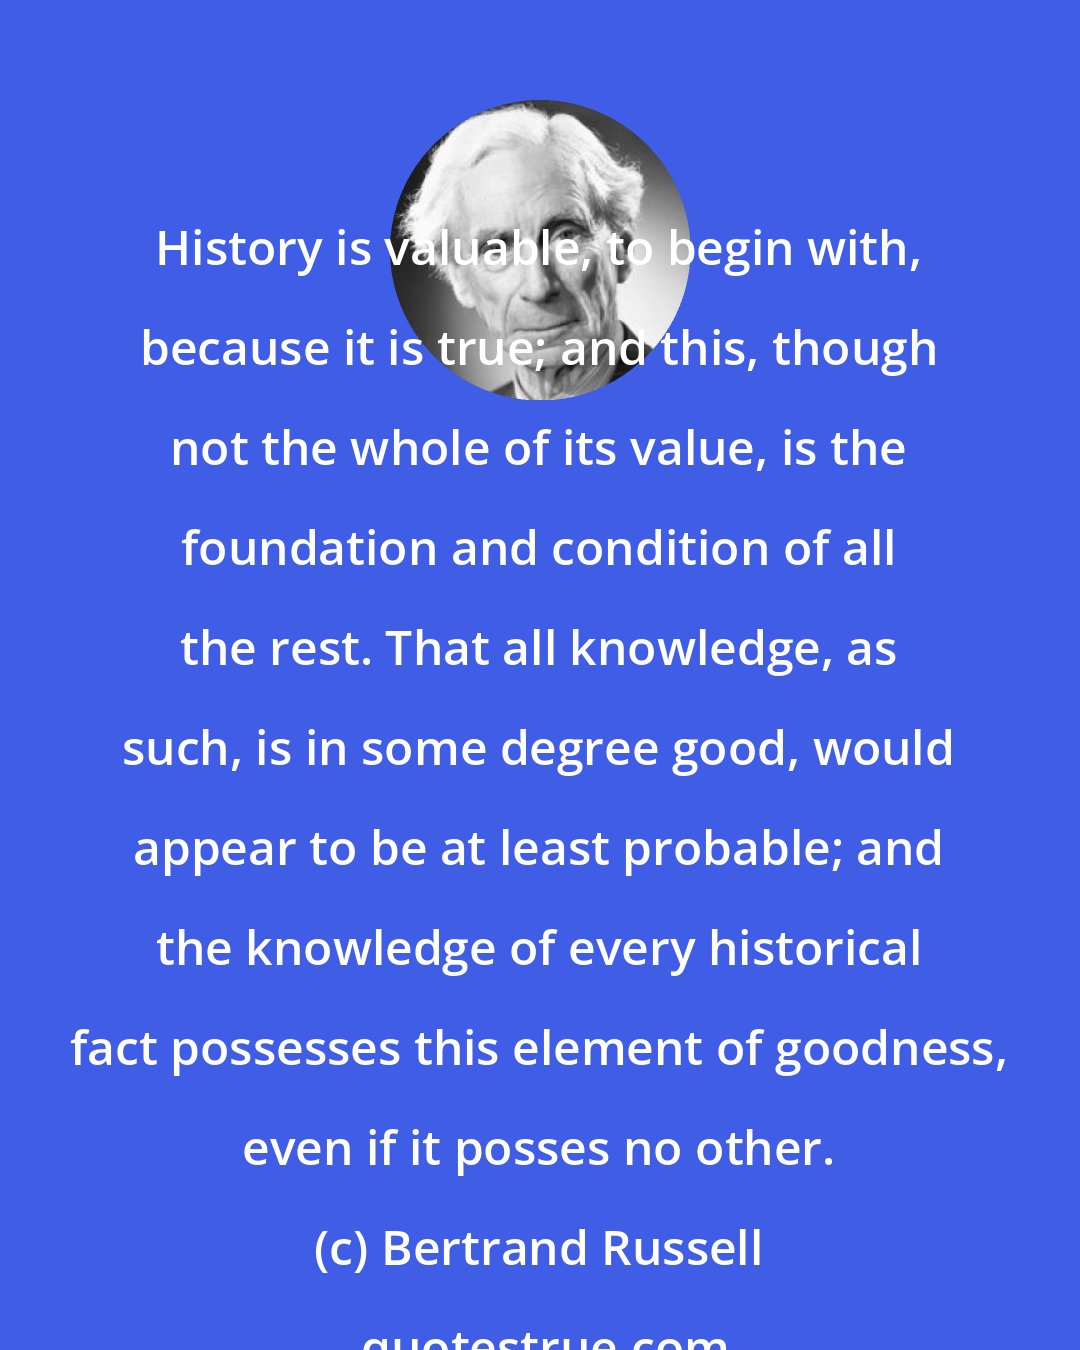 Bertrand Russell: History is valuable, to begin with, because it is true; and this, though not the whole of its value, is the foundation and condition of all the rest. That all knowledge, as such, is in some degree good, would appear to be at least probable; and the knowledge of every historical fact possesses this element of goodness, even if it posses no other.